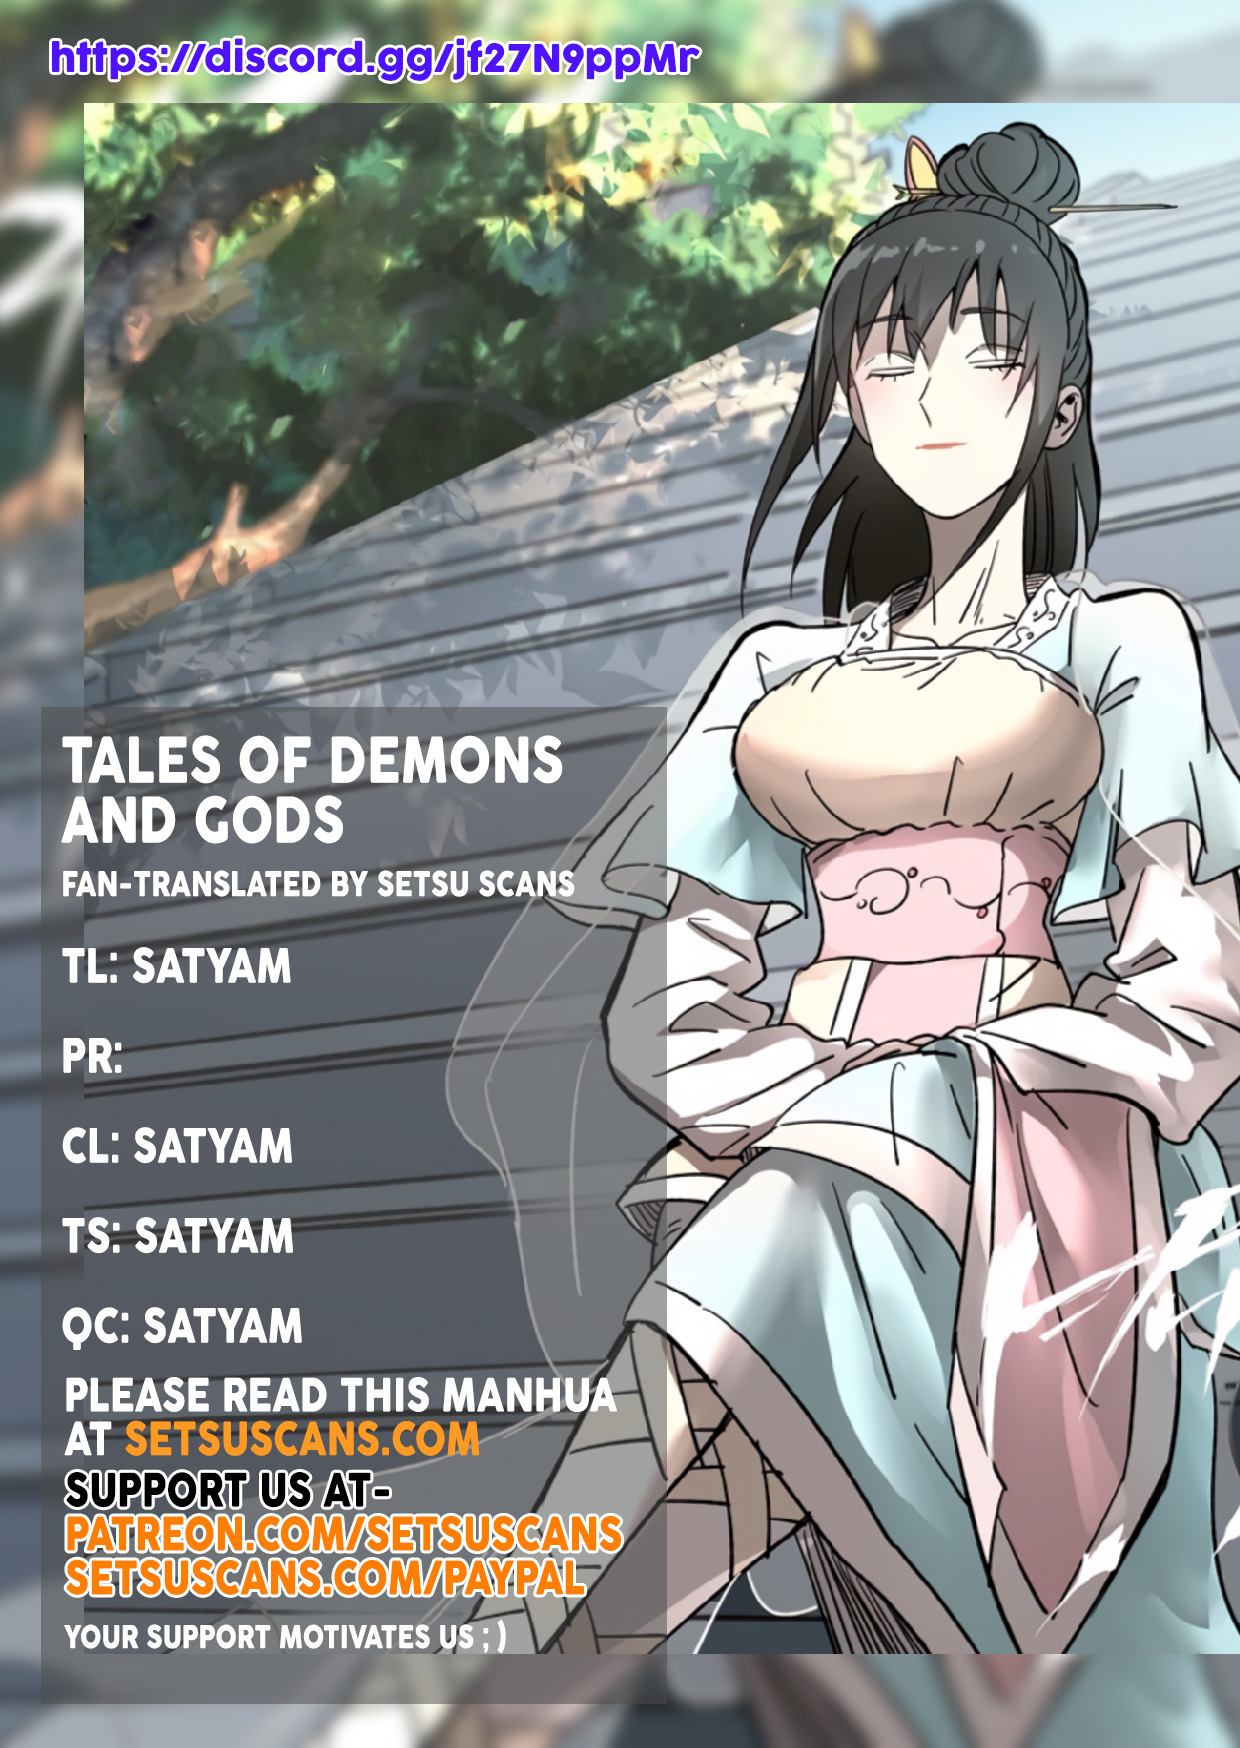 Tales of Demons and Gods - Chapter 33468 - Amazing Cultivation (1) - Image 1